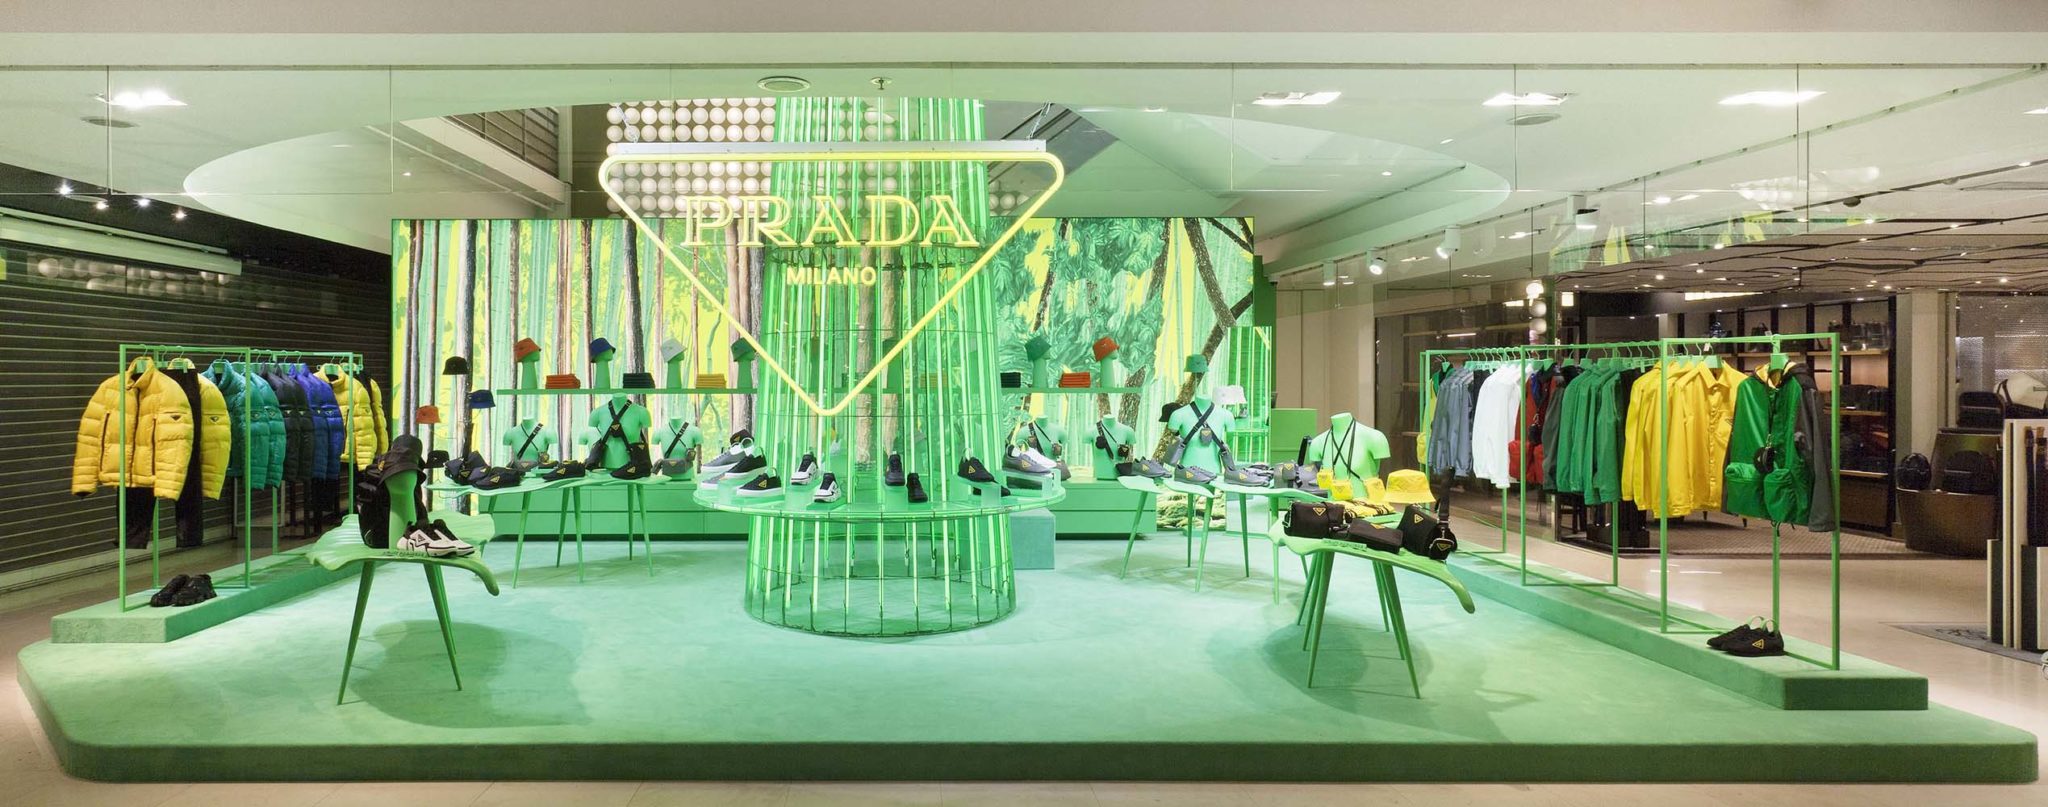 Prada present ‘Hyper Leaves’ in collaboration with Galeries Lafayette